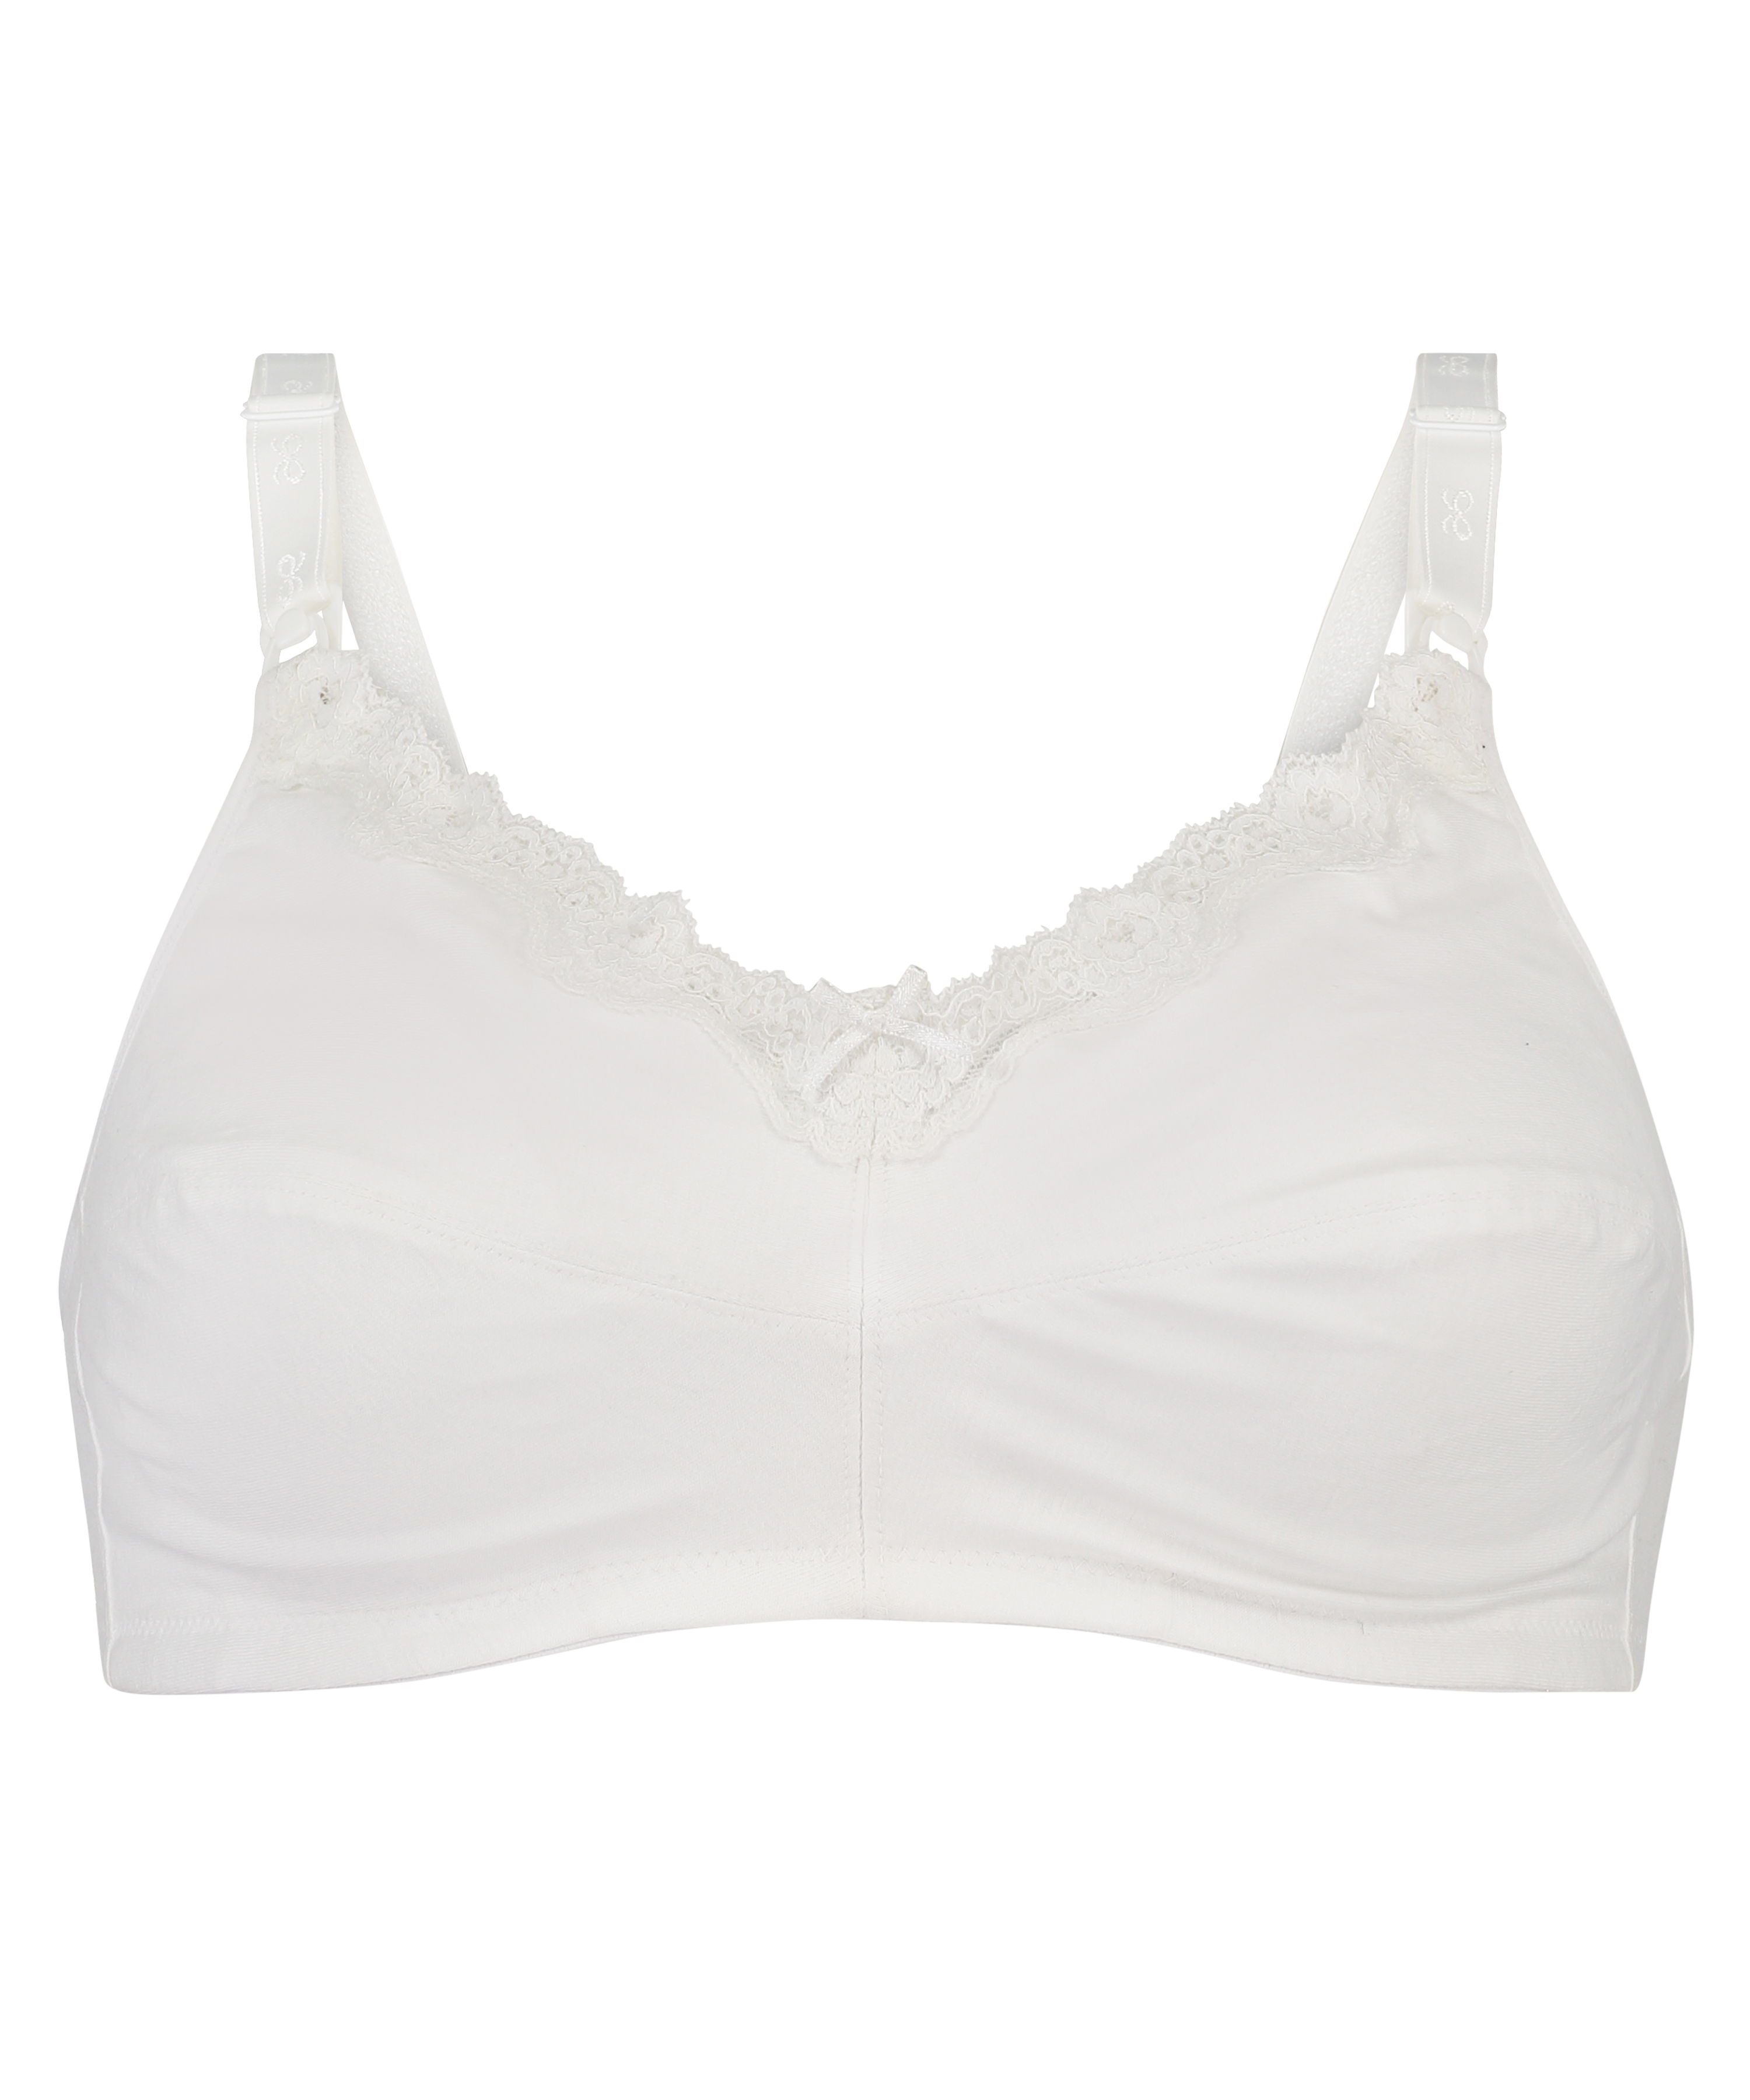 M&S Bra Maternity Nursing Non-Wired Non-Padded Lacy 36DD White Mix BNWoT 